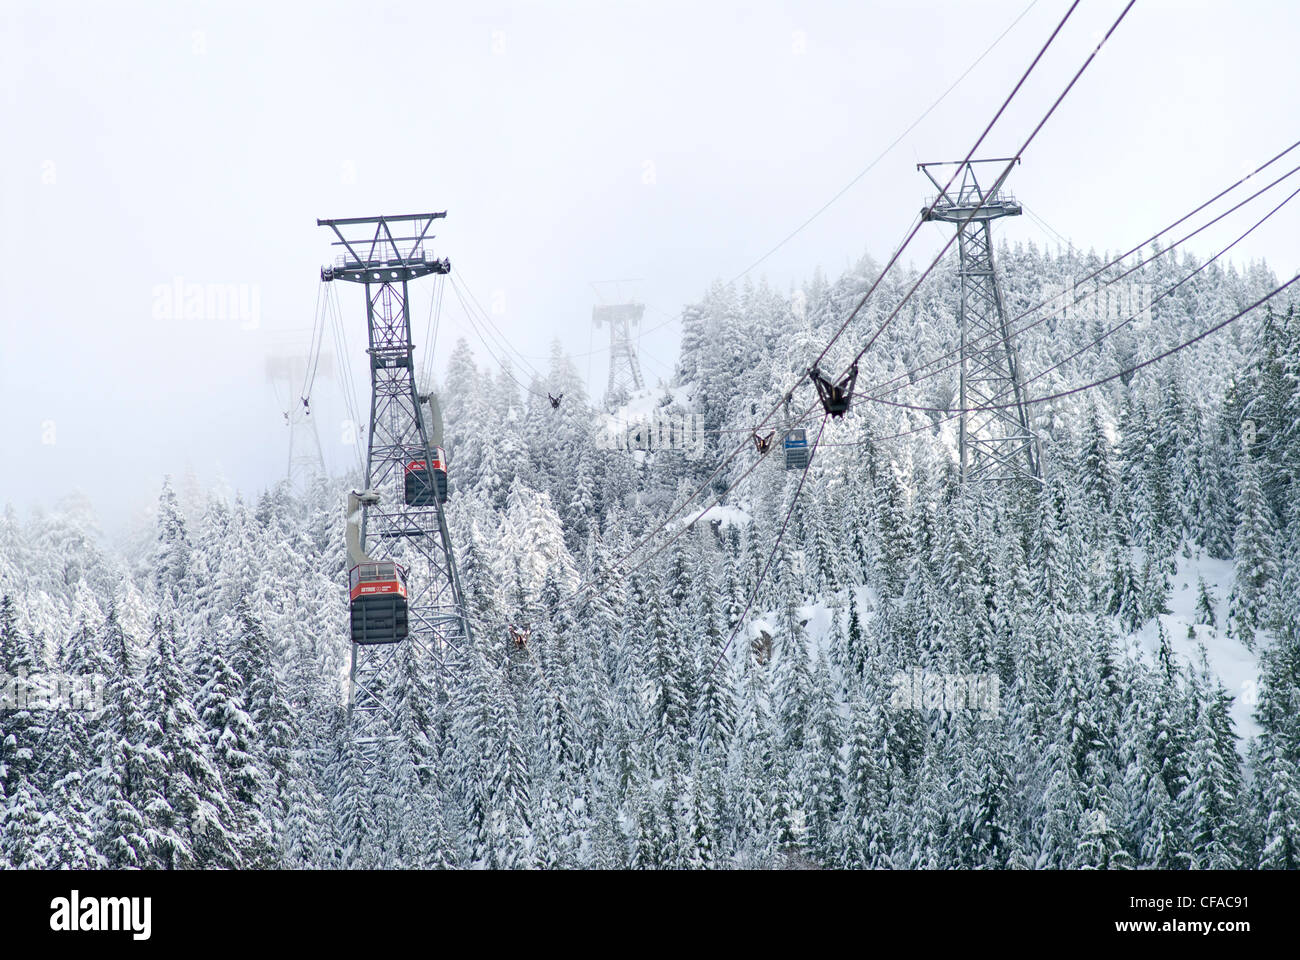 The Grouse Mountain Skyride travels up towards the top of Grouse Mountain in North Vancouver, British Columbia, Canada. Stock Photo